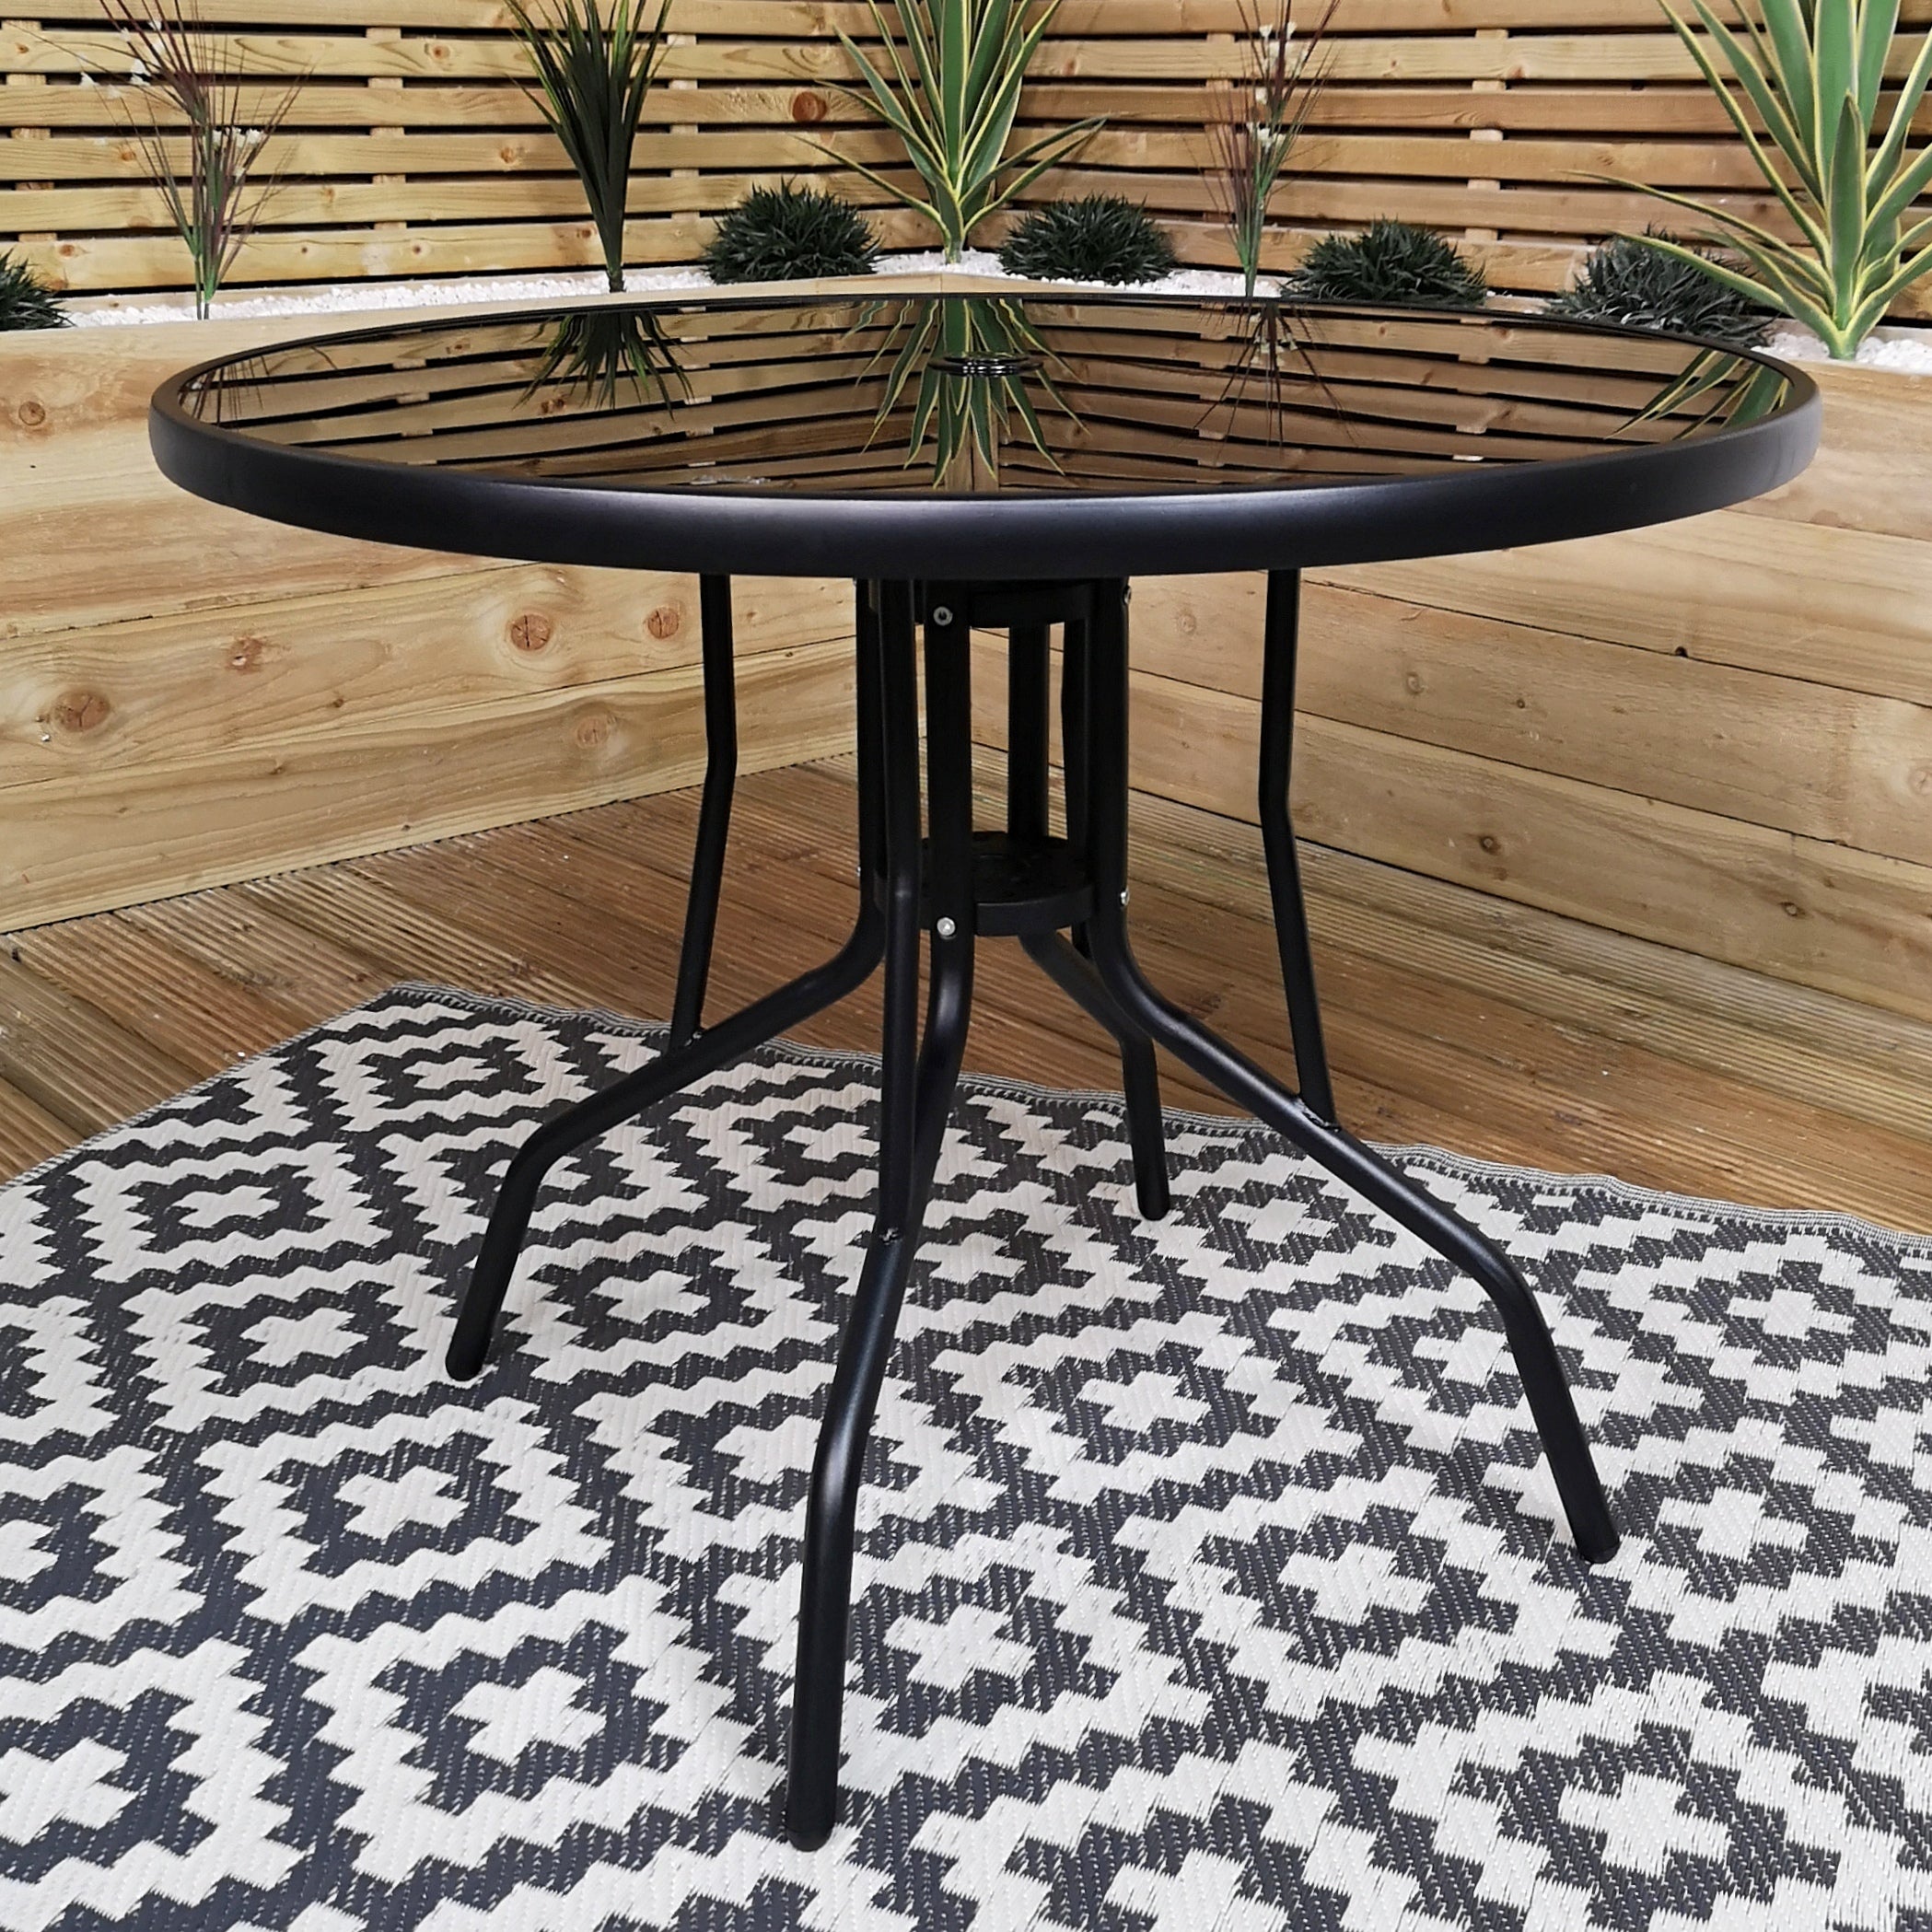 Outdoor 2 Person Round Glass Top Garden Patio Dining Table Chairs Set